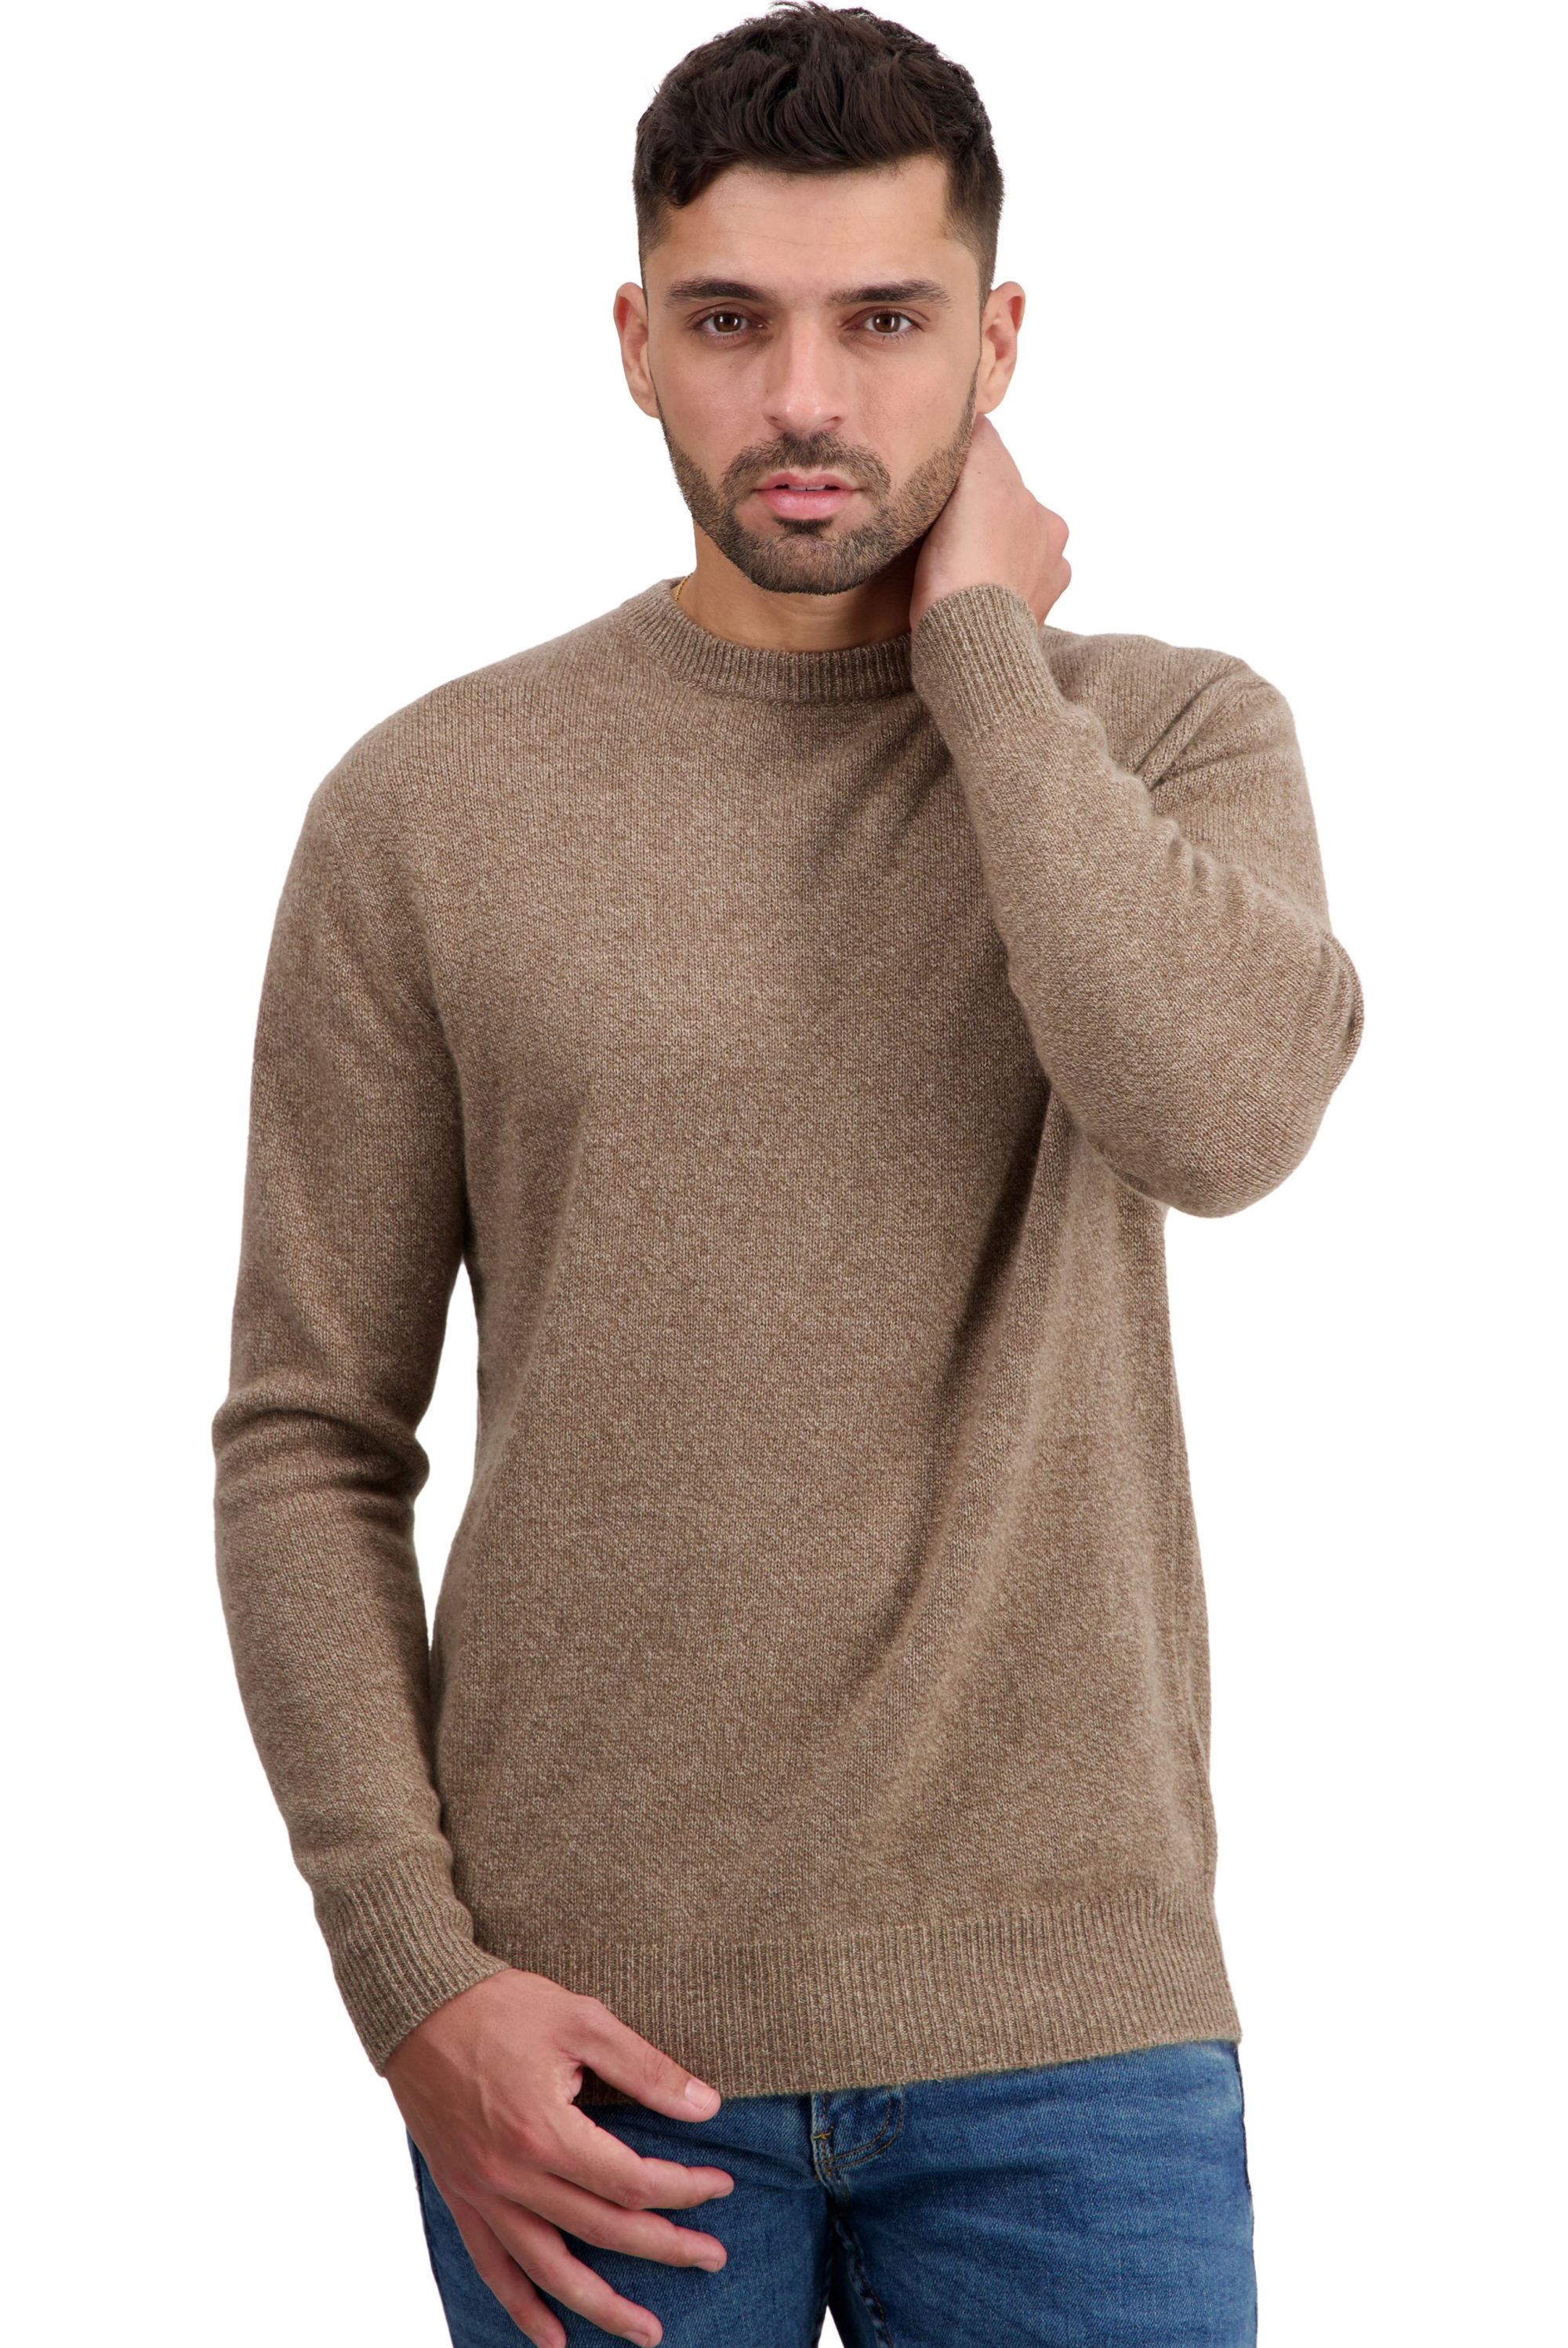 Cashmere men basic sweaters at low prices touraine first tan marl 3xl